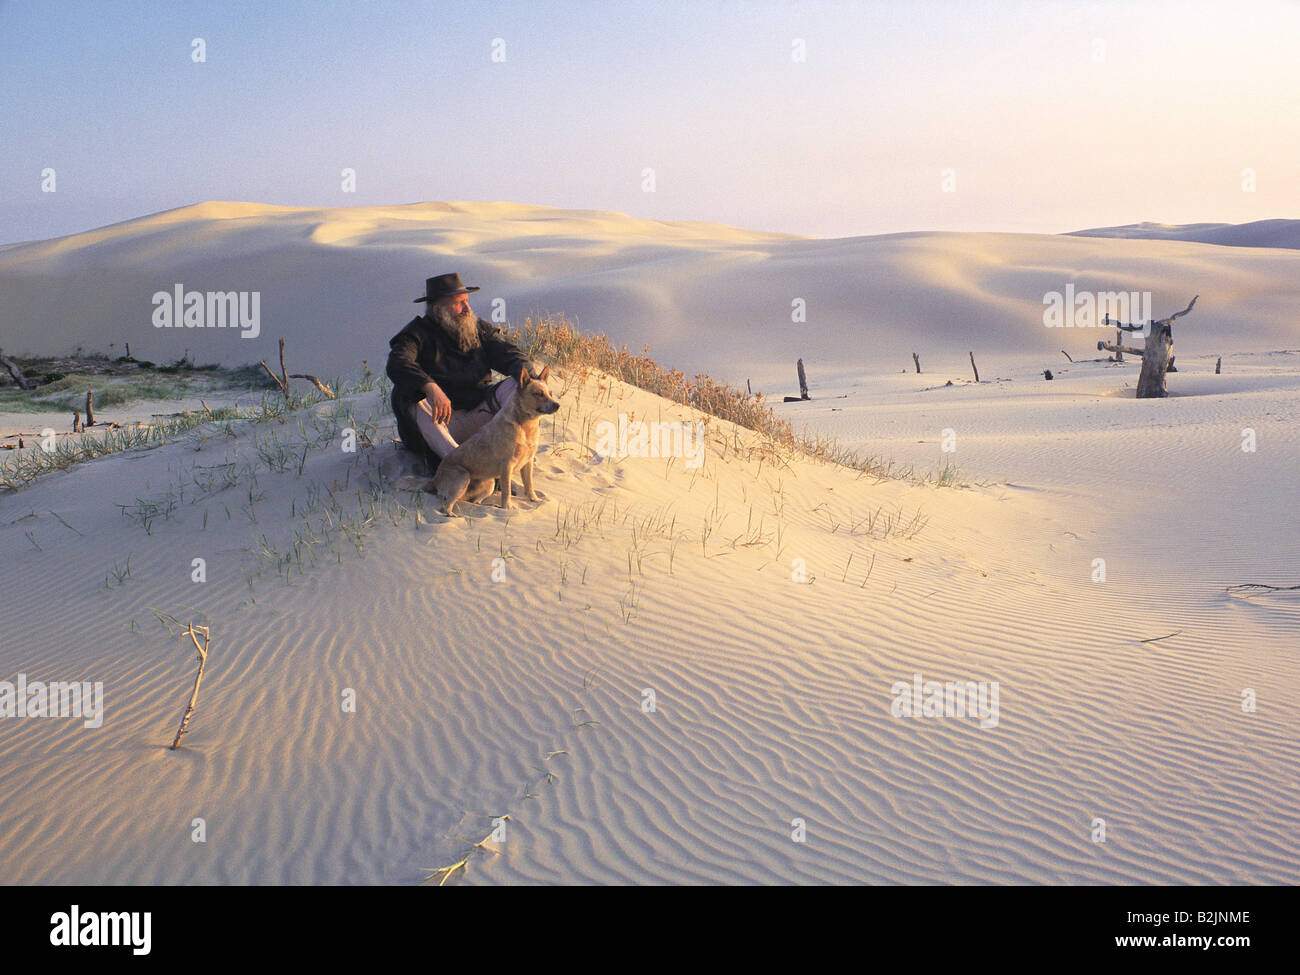 Australia. Outback. An old man with grey beard sitting with his dog on desert sand dunes. Stock Photo